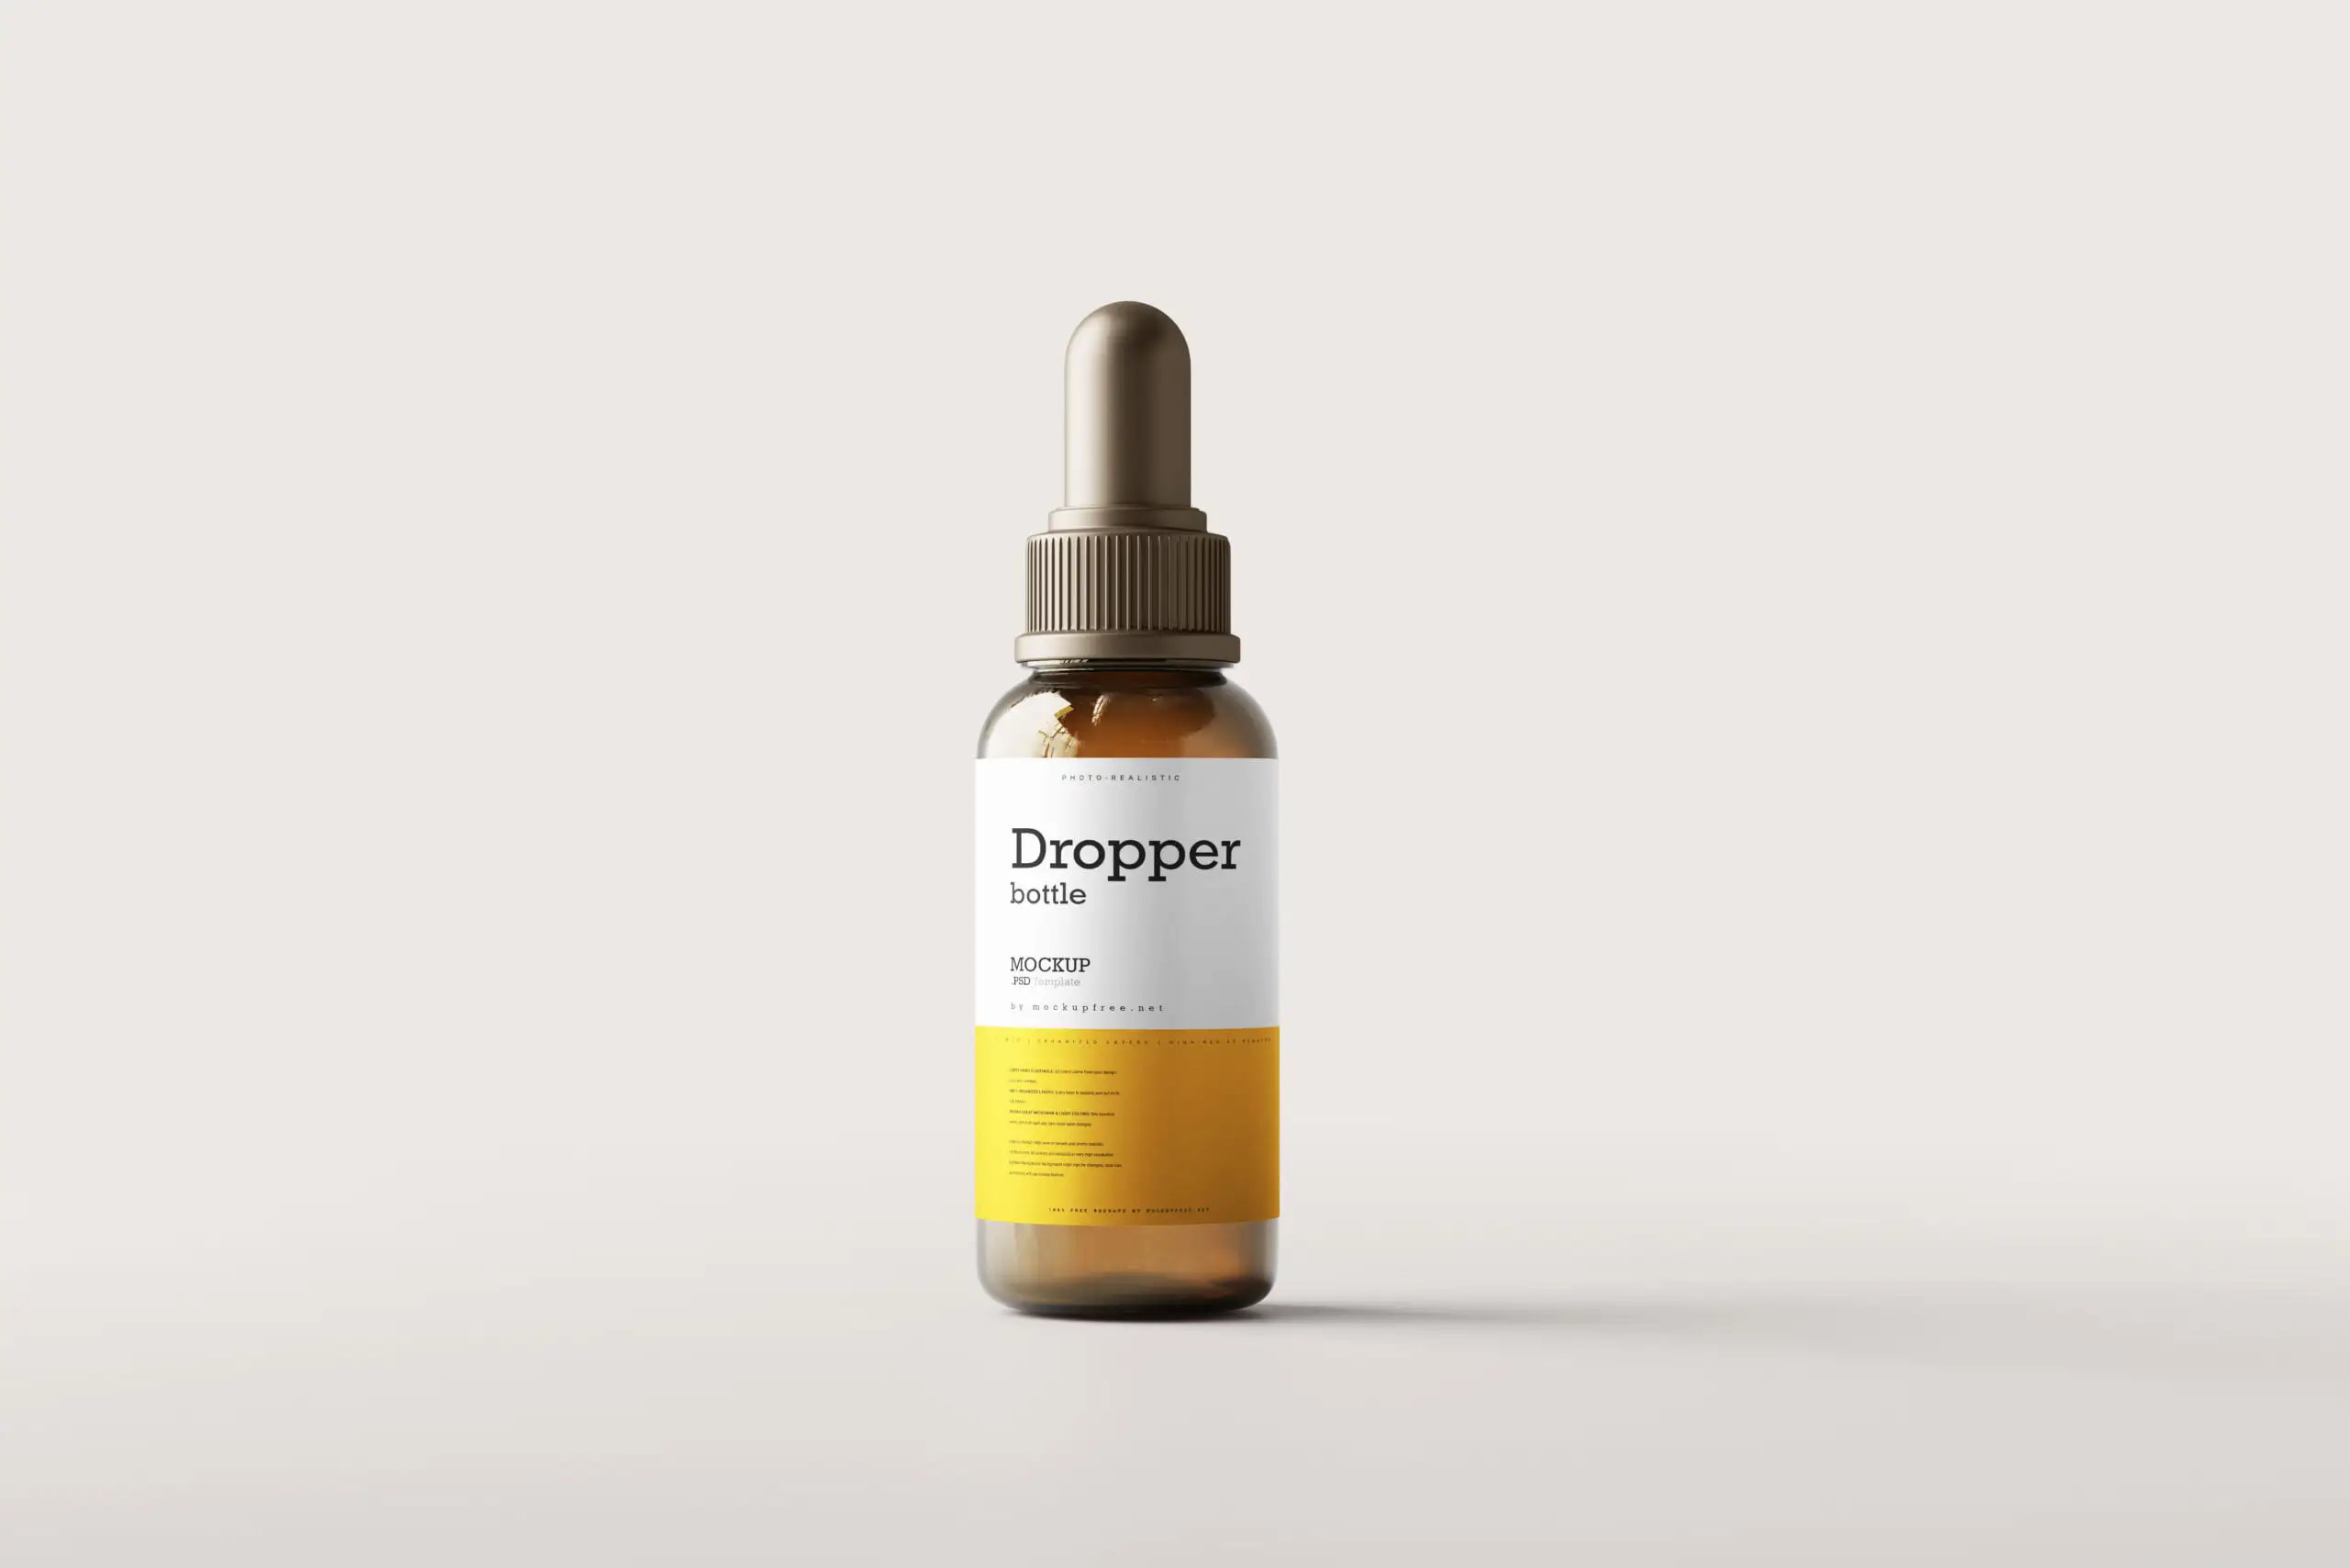 3 Amber Glass Dropper Bottle Mockups and Box in Different Sights FREE PSD